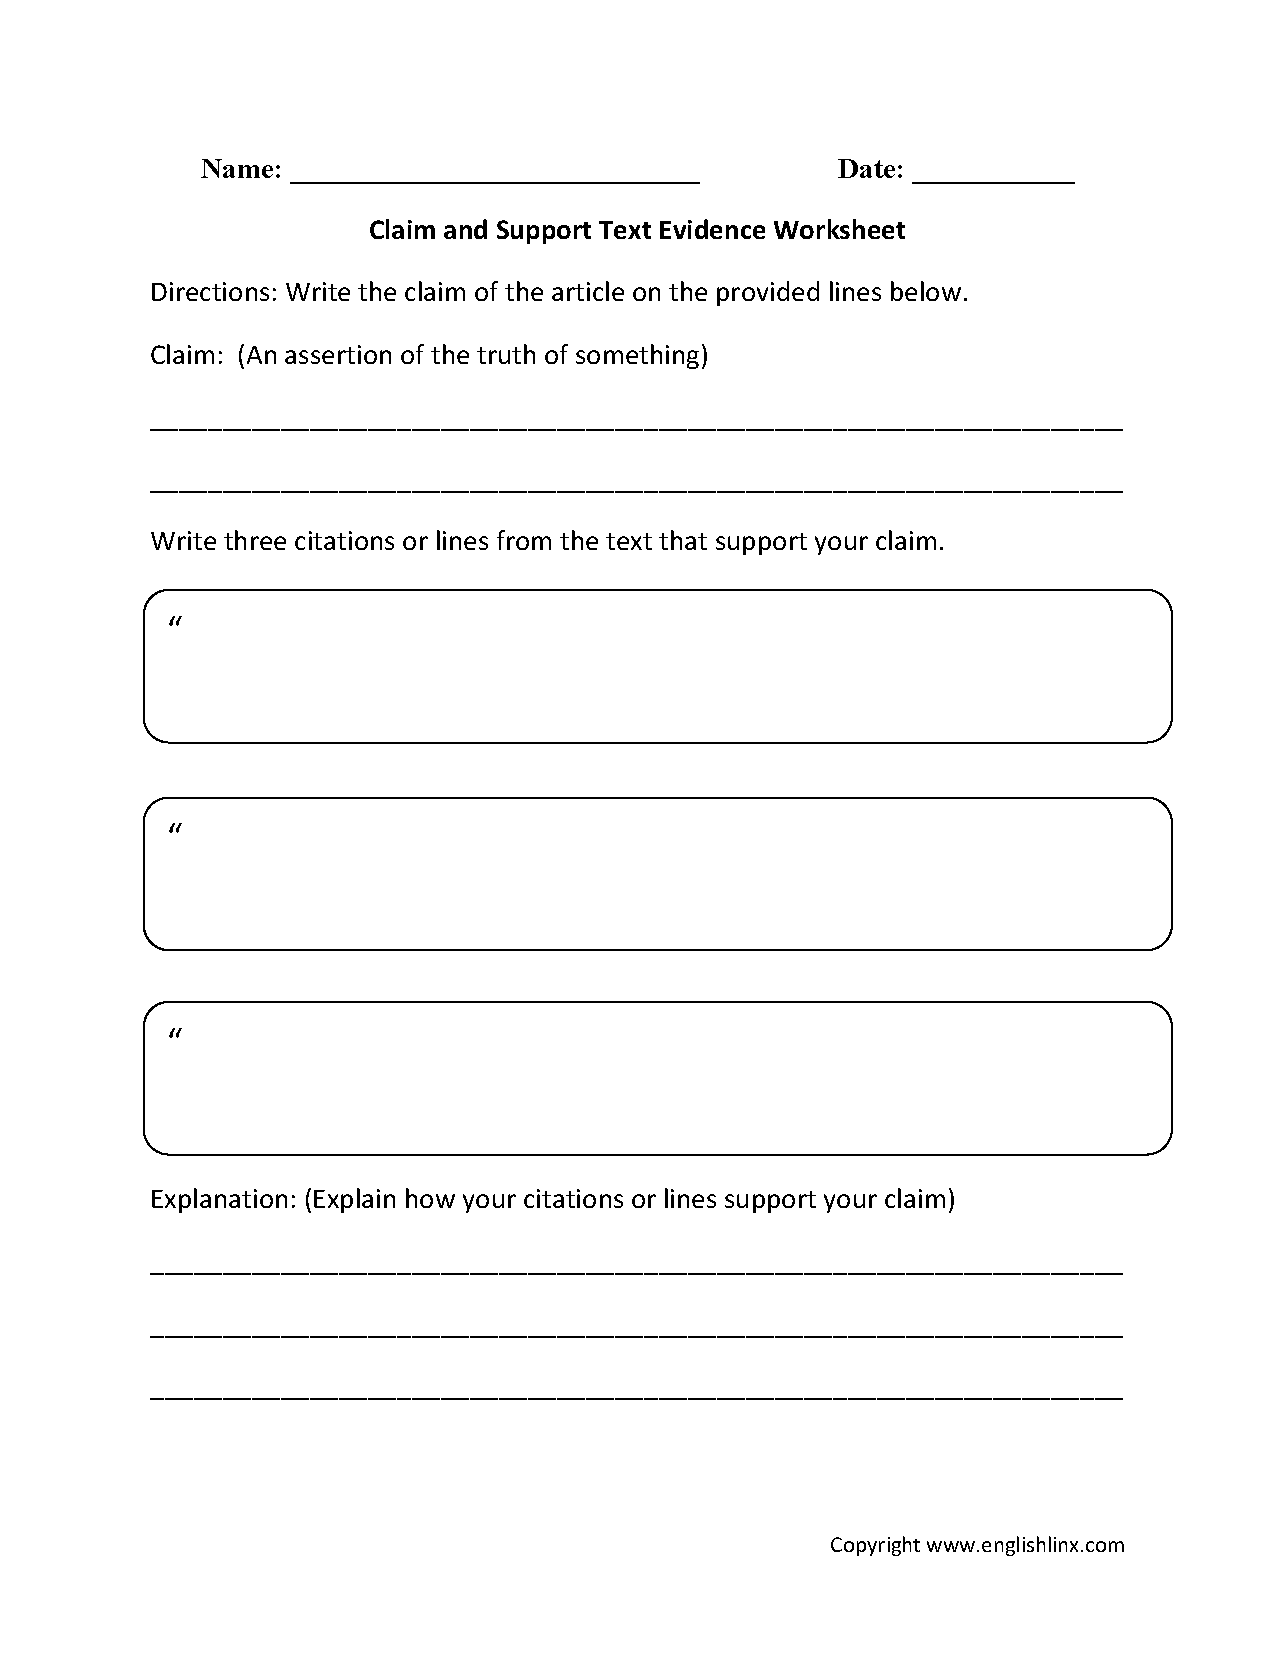 Claim and Support Text Evidence Worksheets